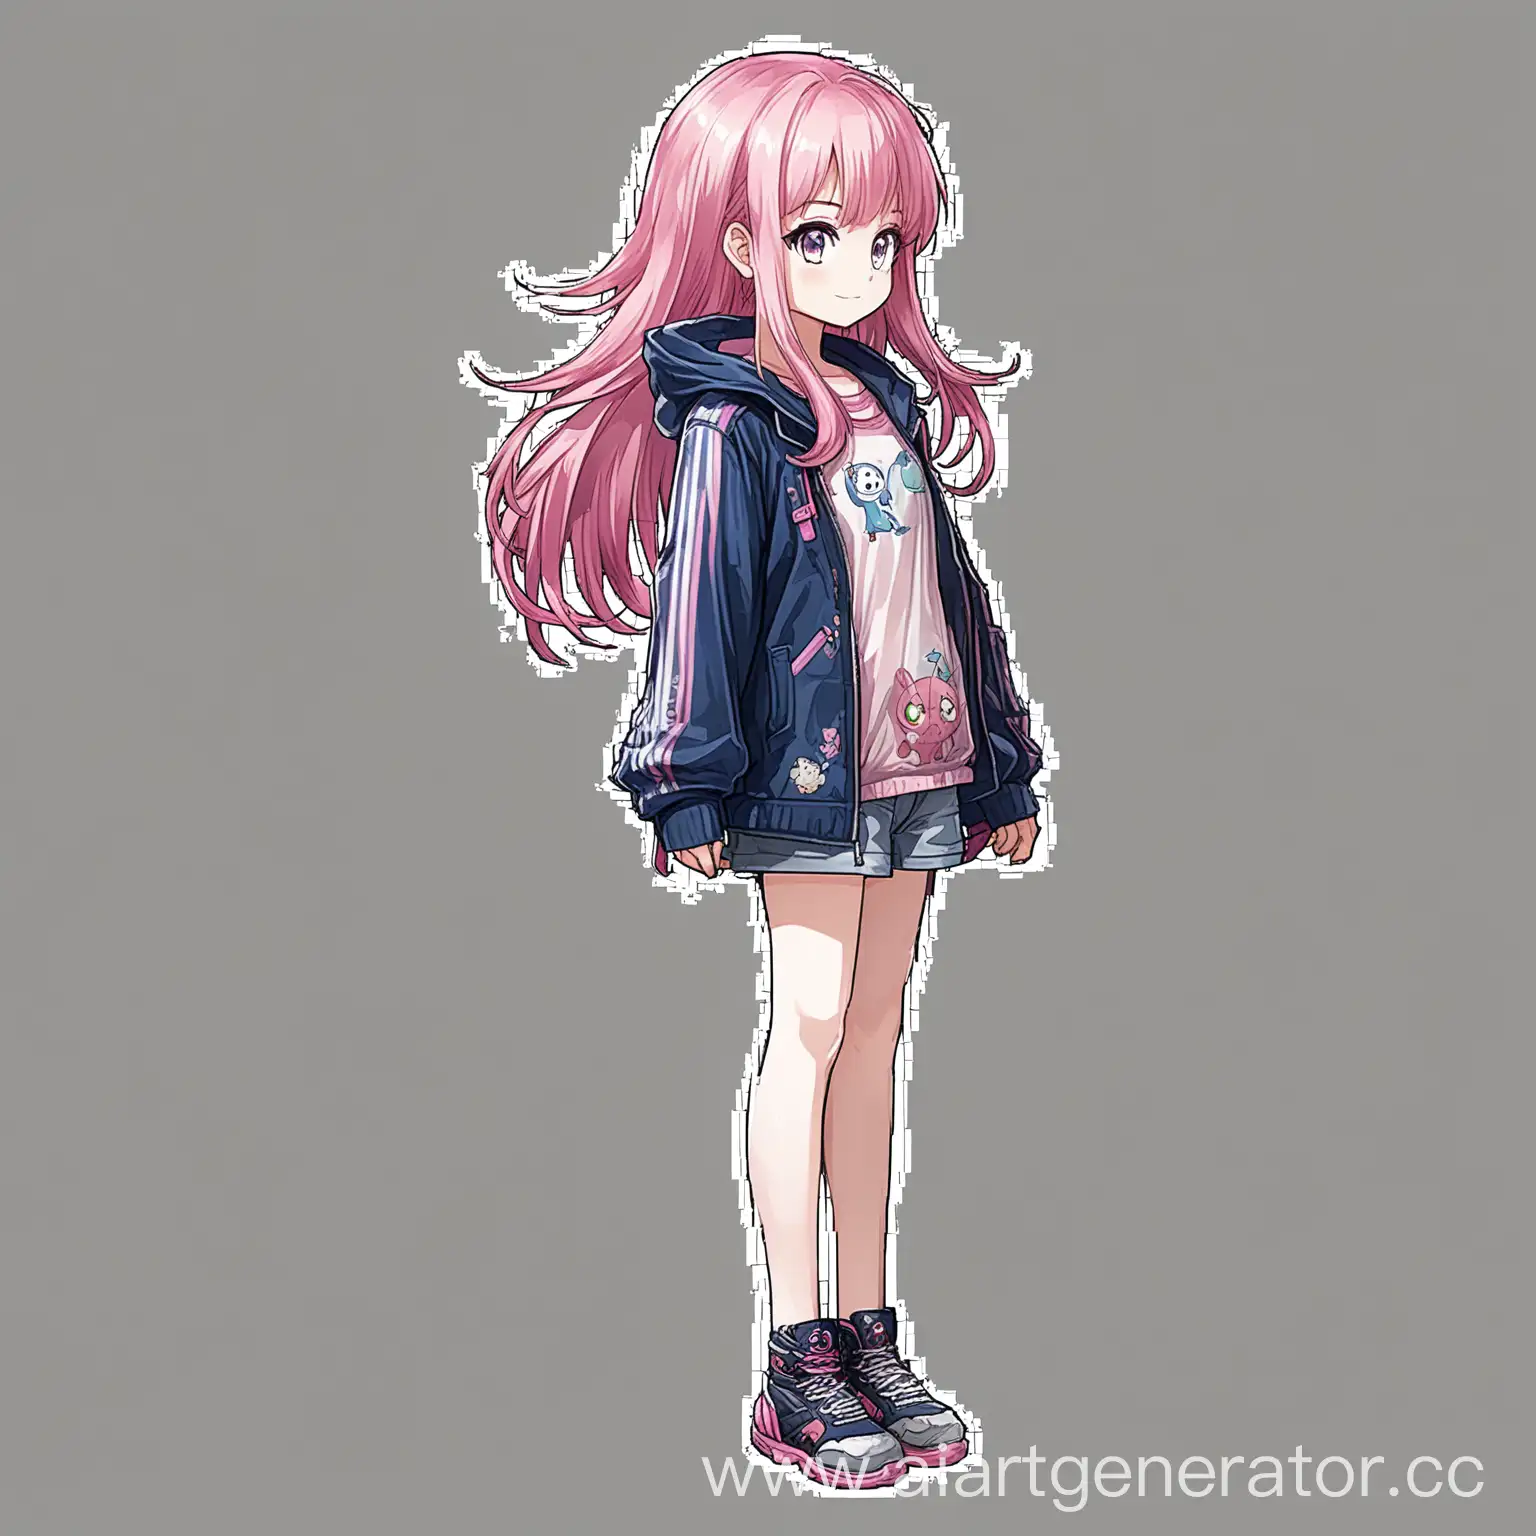 PinkHaired-Anime-Game-Character-Illustration-in-Side-View